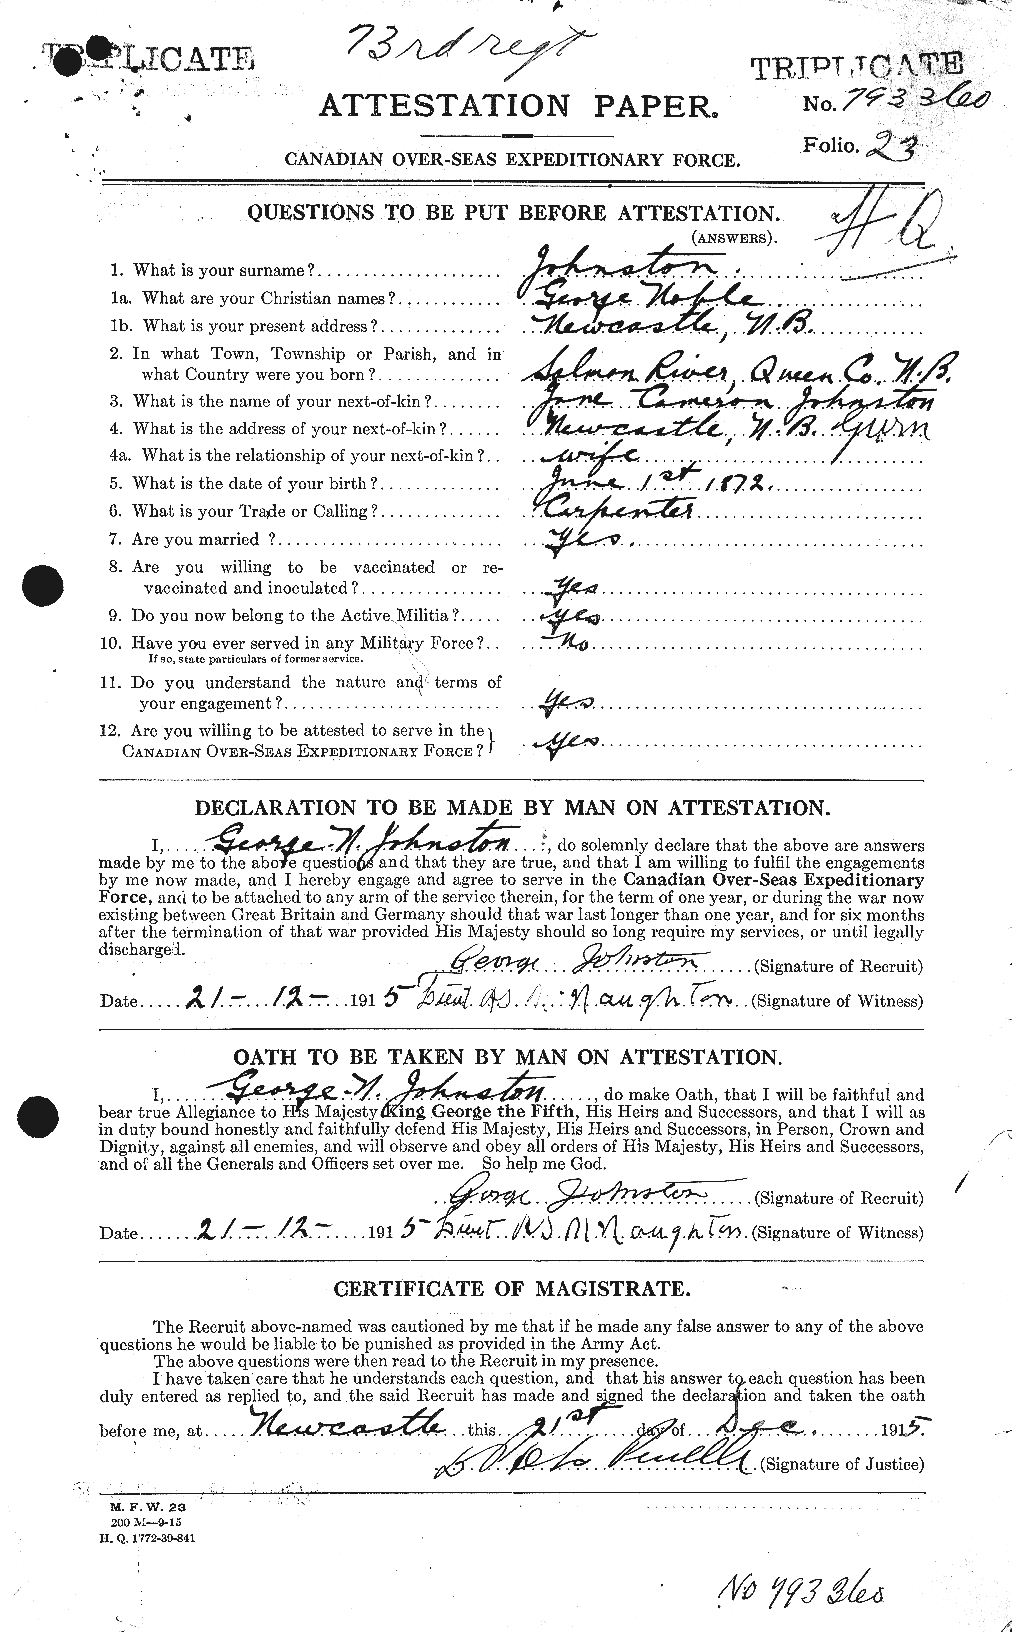 Personnel Records of the First World War - CEF 419441a